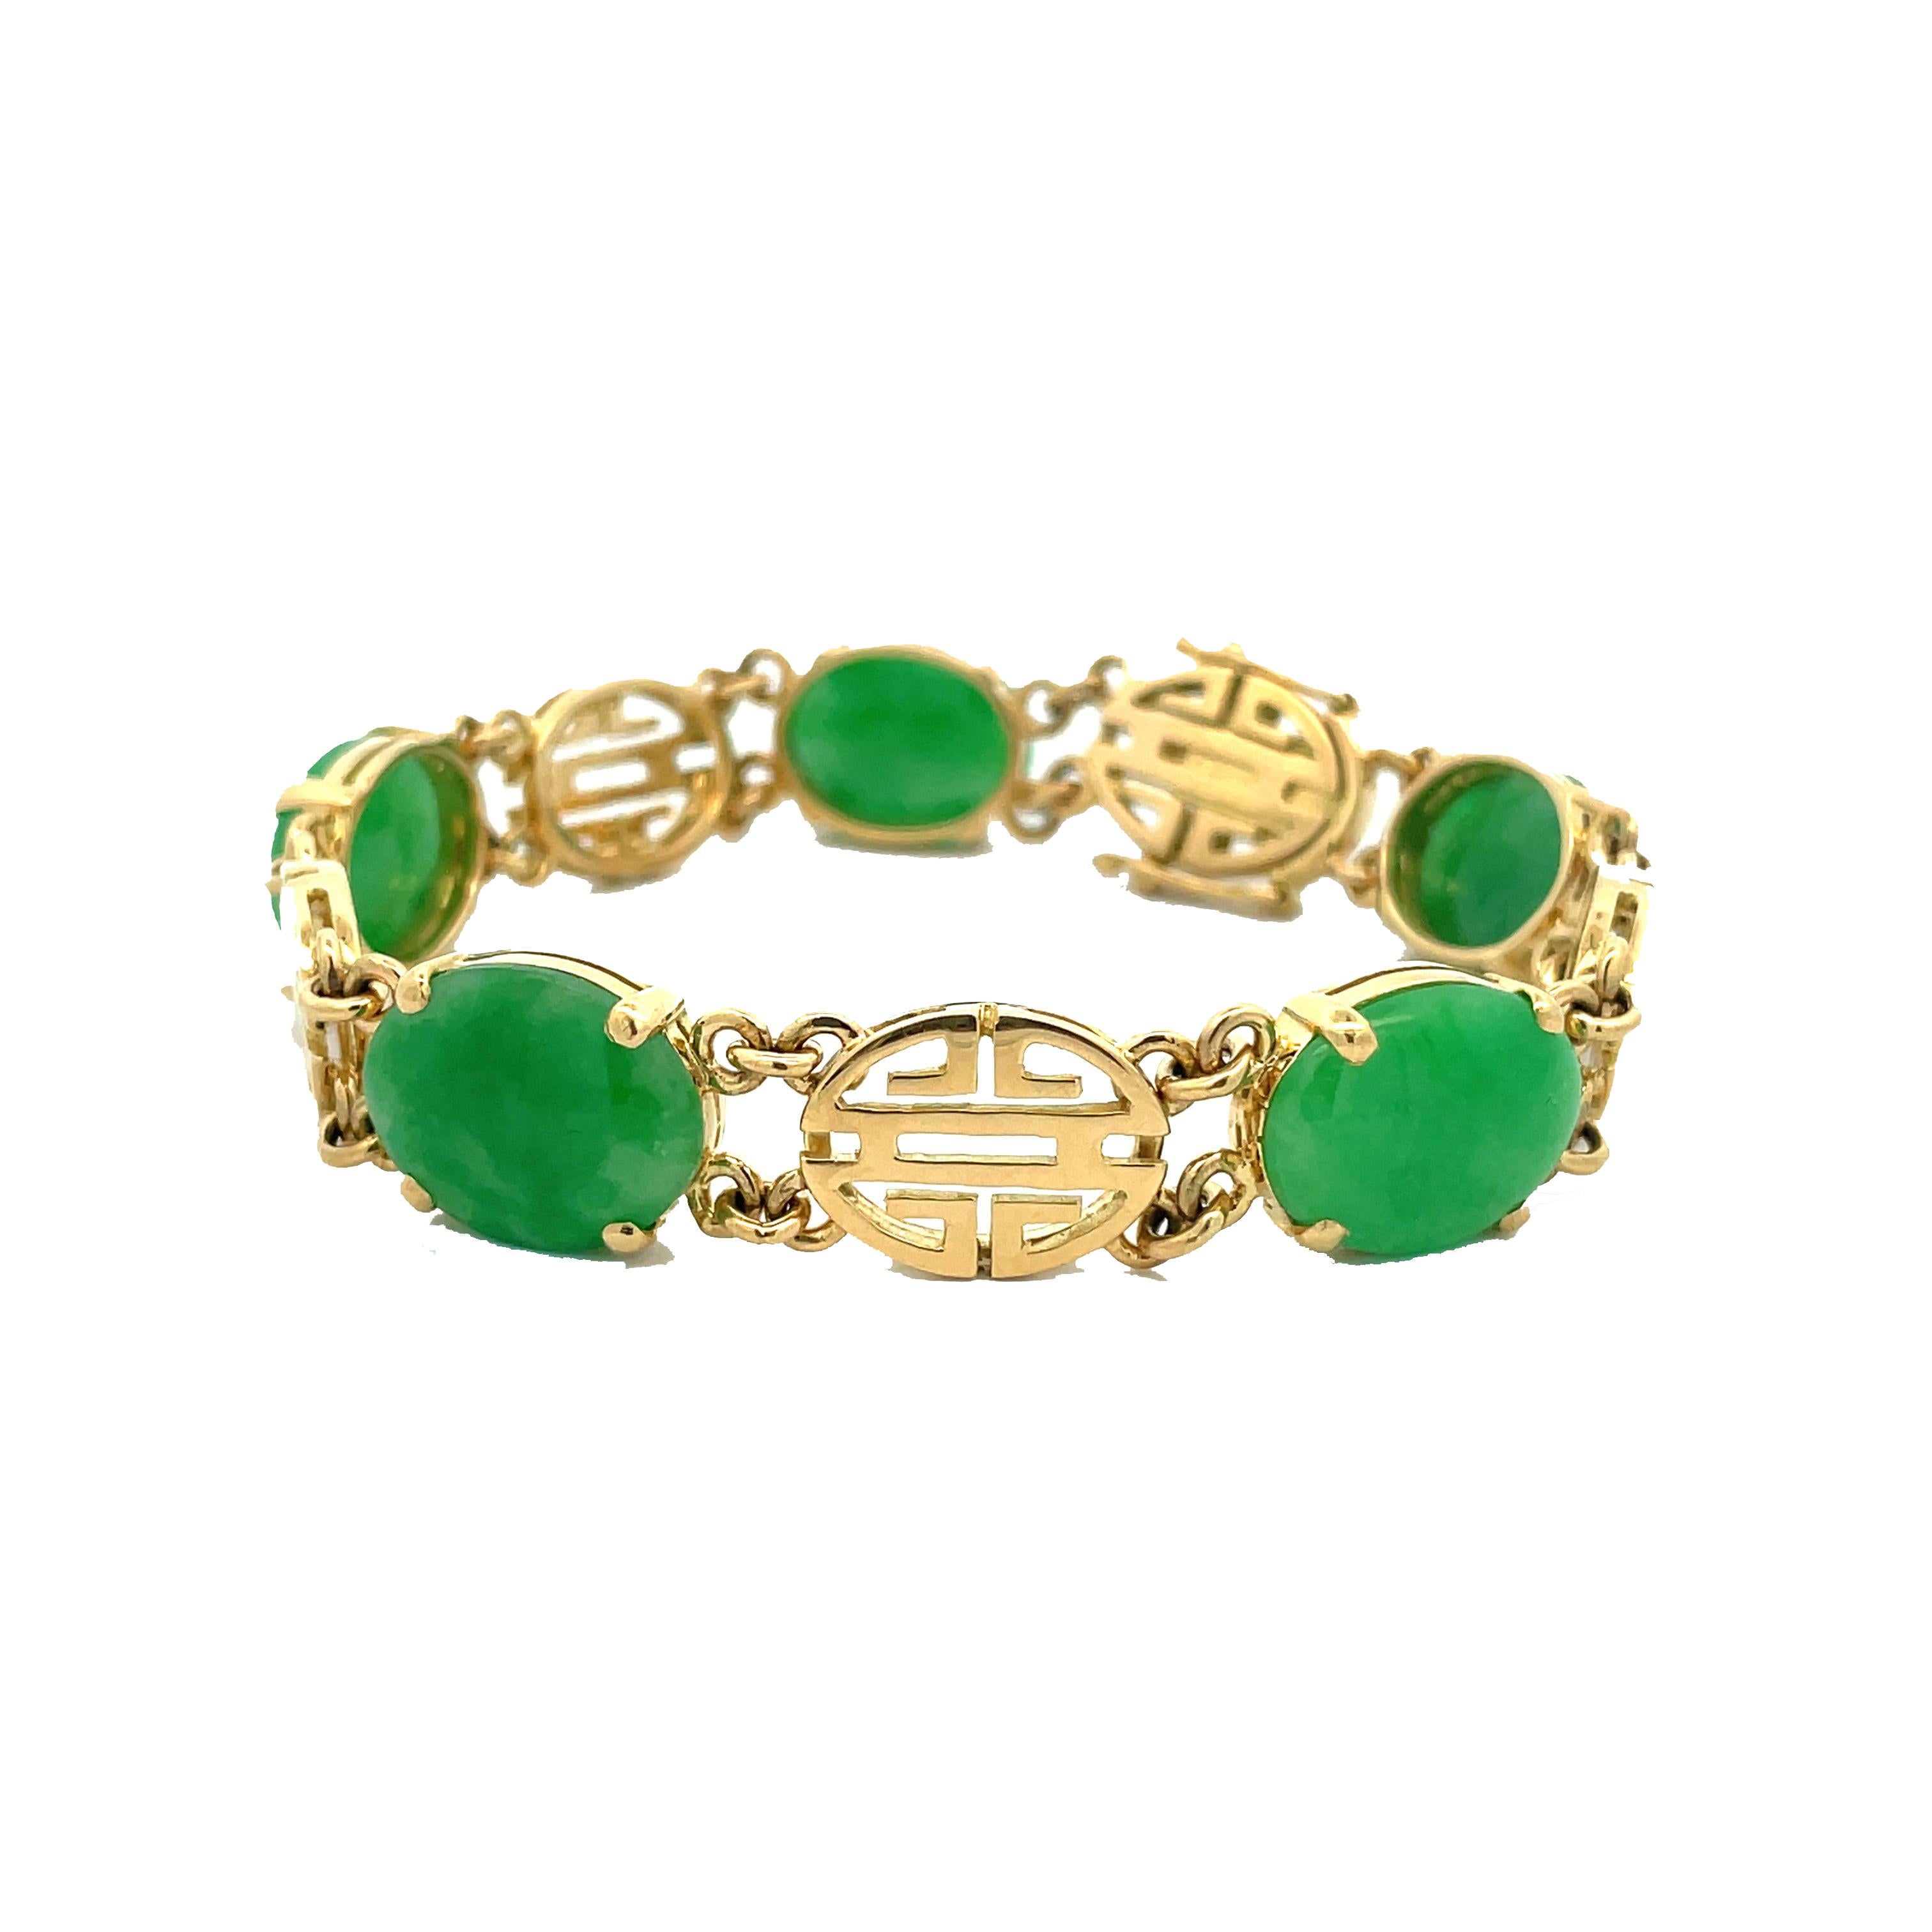 This is a stunning bracelet crafted in beaming 18K yellow gold that showcases a beautiful collection of rich green Jadeite Jade oval cabochons accompanied by a GIA Report. In this exceptional and exceedingly beautiful 18K yellow gold setting, a